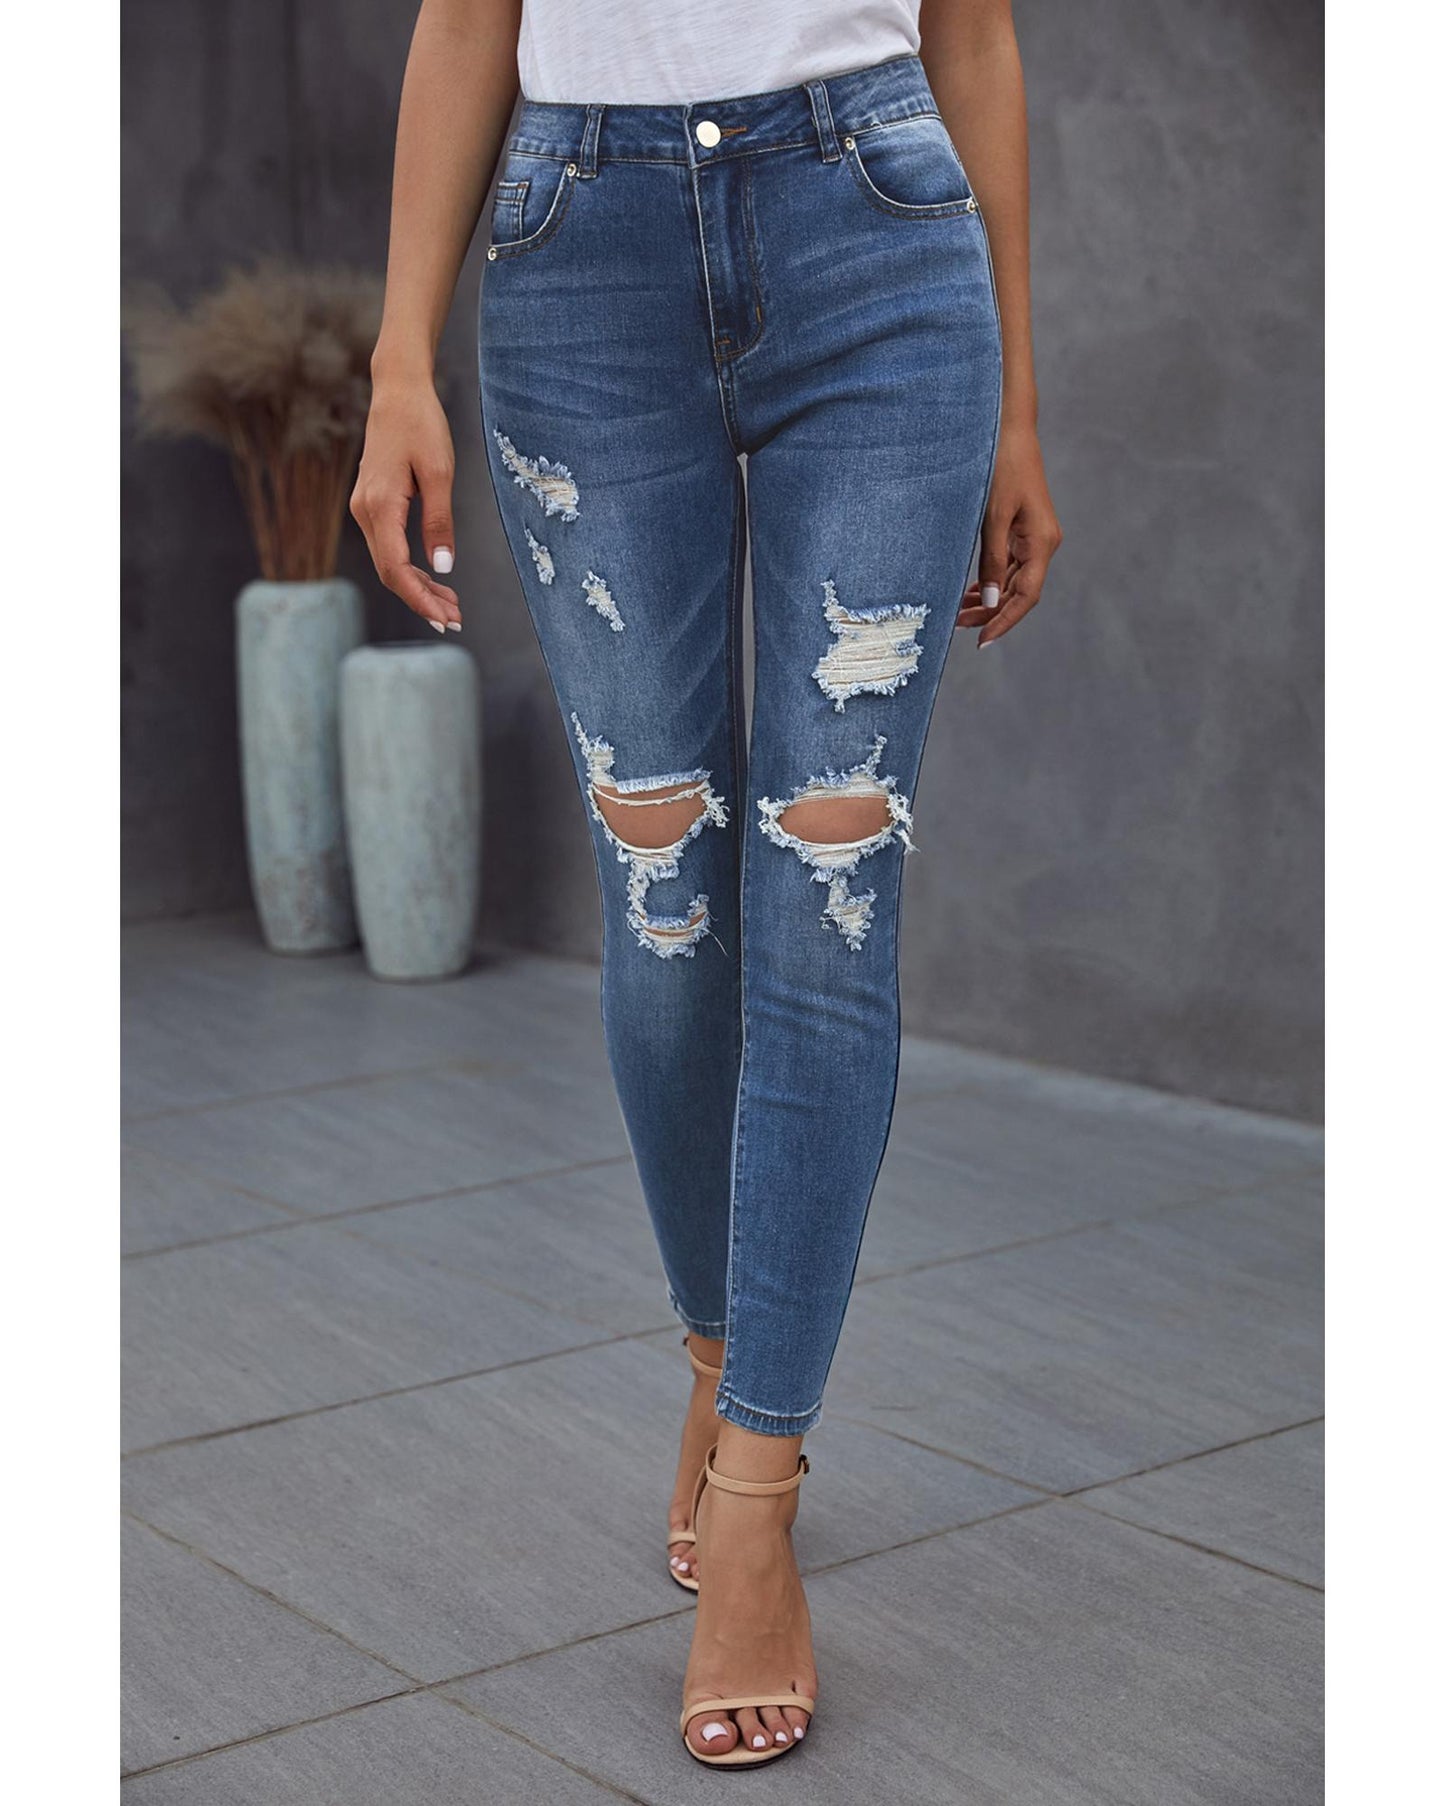 Azura Exchange Hollow Out Vintage Skinny Ripped Jeans - XL